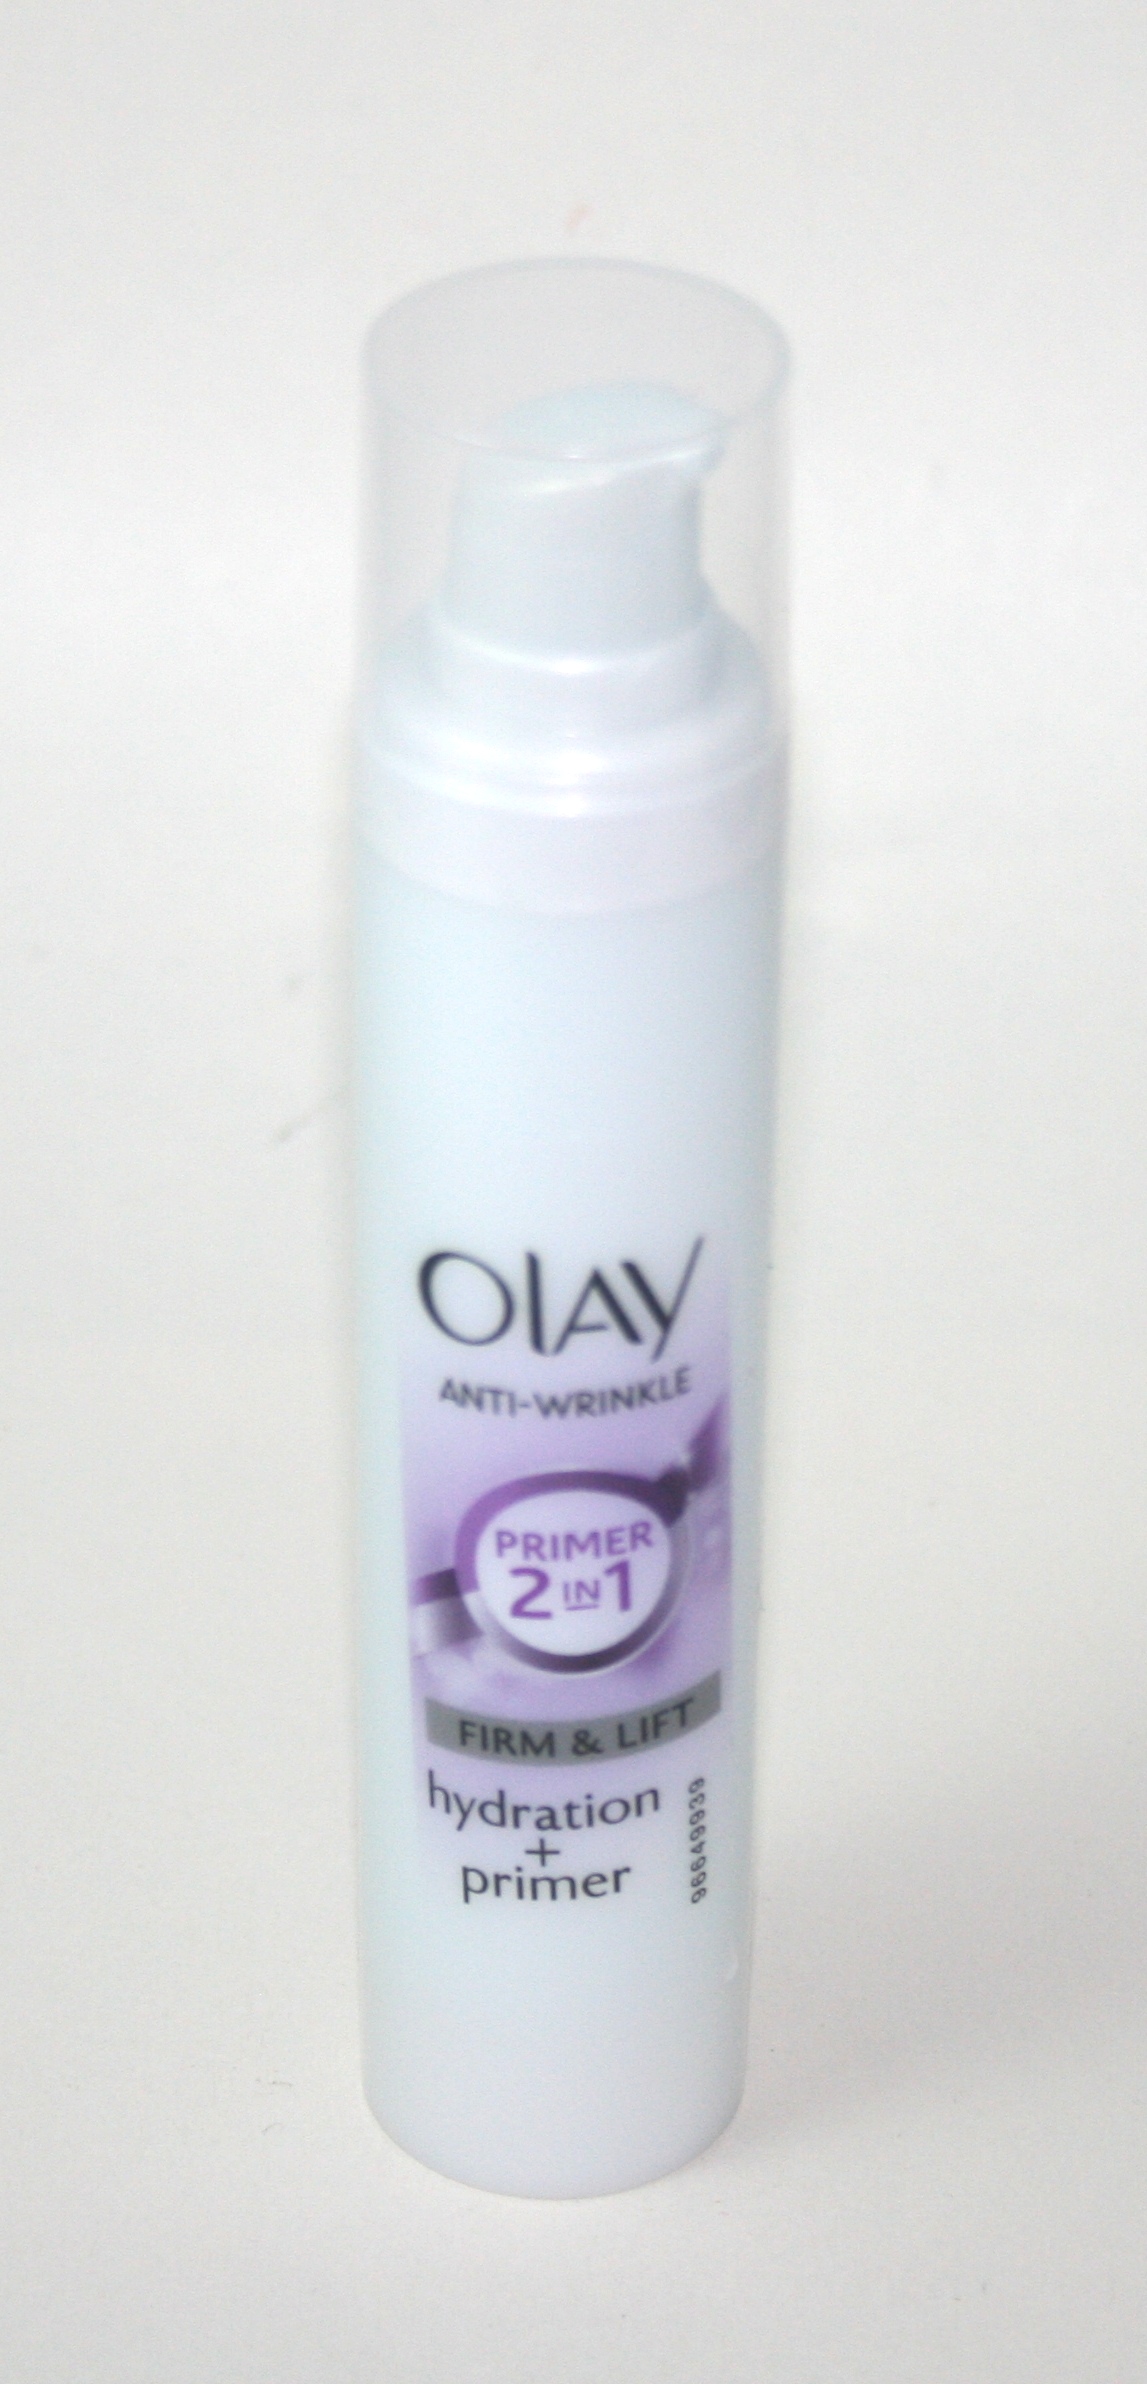 Quick Pick Tuesday: Olay Anti-Wrinkle Firm & Lift Moisturiser 2 in 1 Hydration + Primer